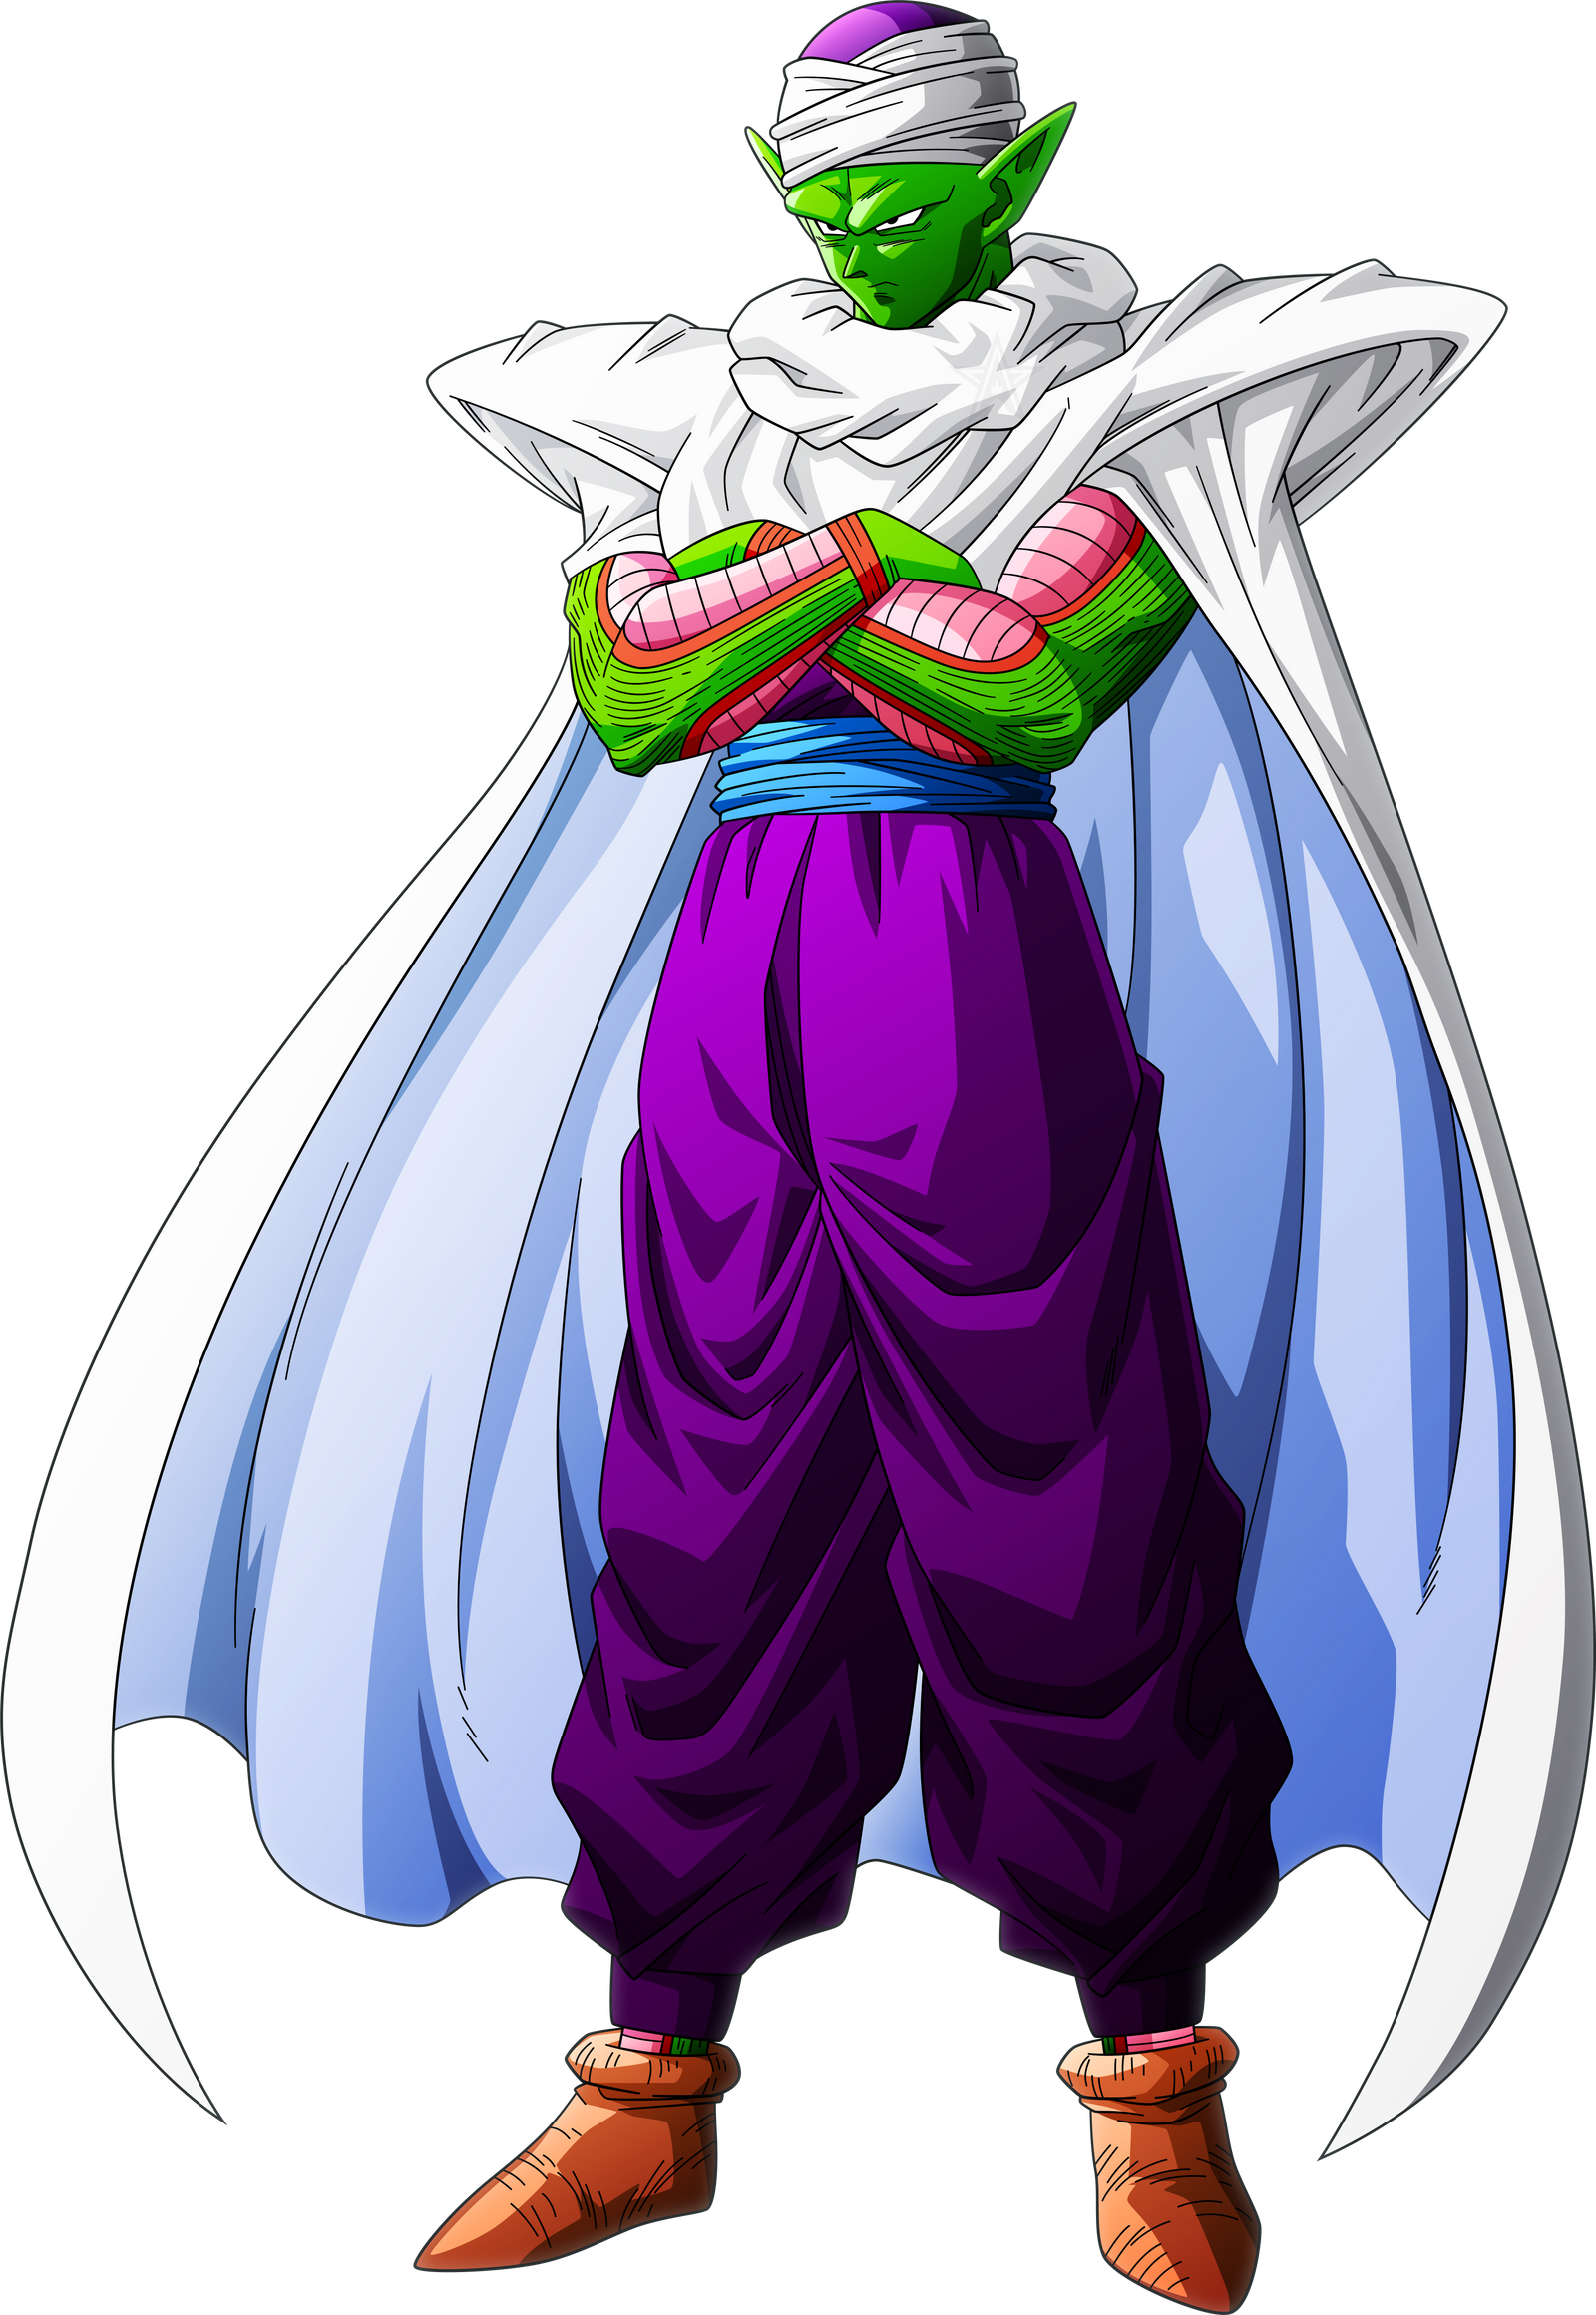 Piccolo #1 by AubreiPrince on DeviantArt